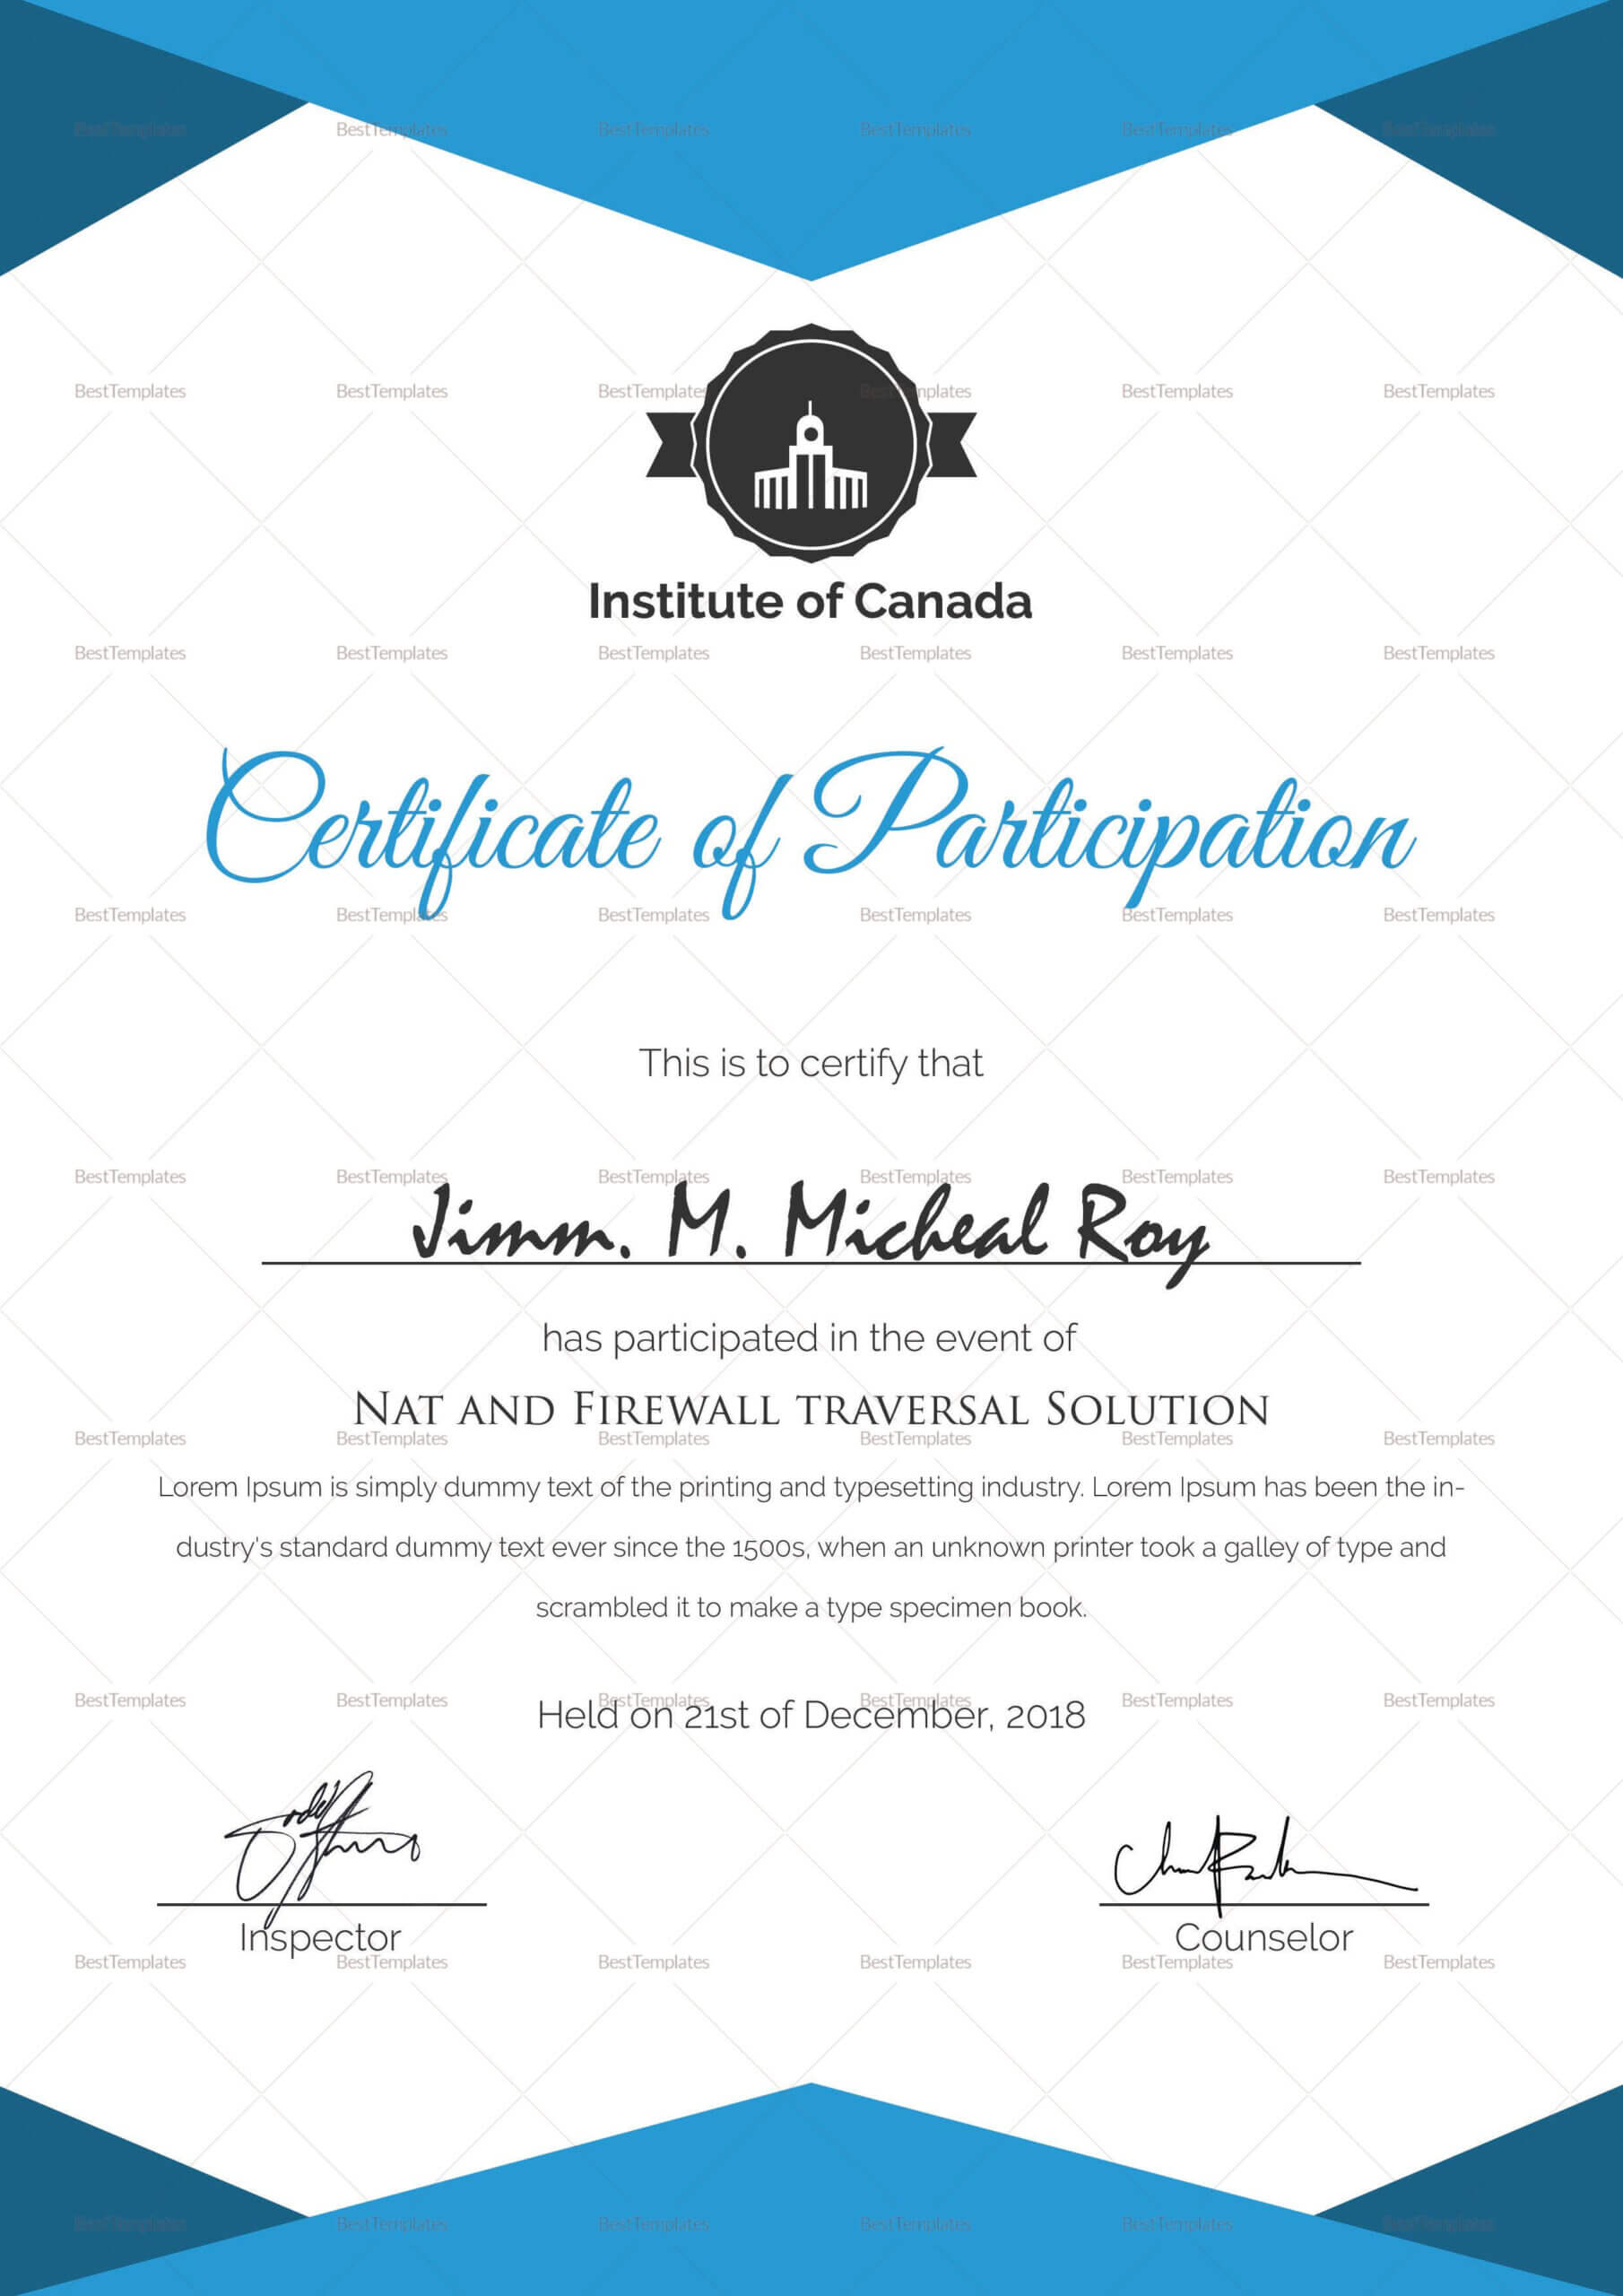 Sample Certificate Of Participation Template | Certificate With Sample Certificate Of Participation Template